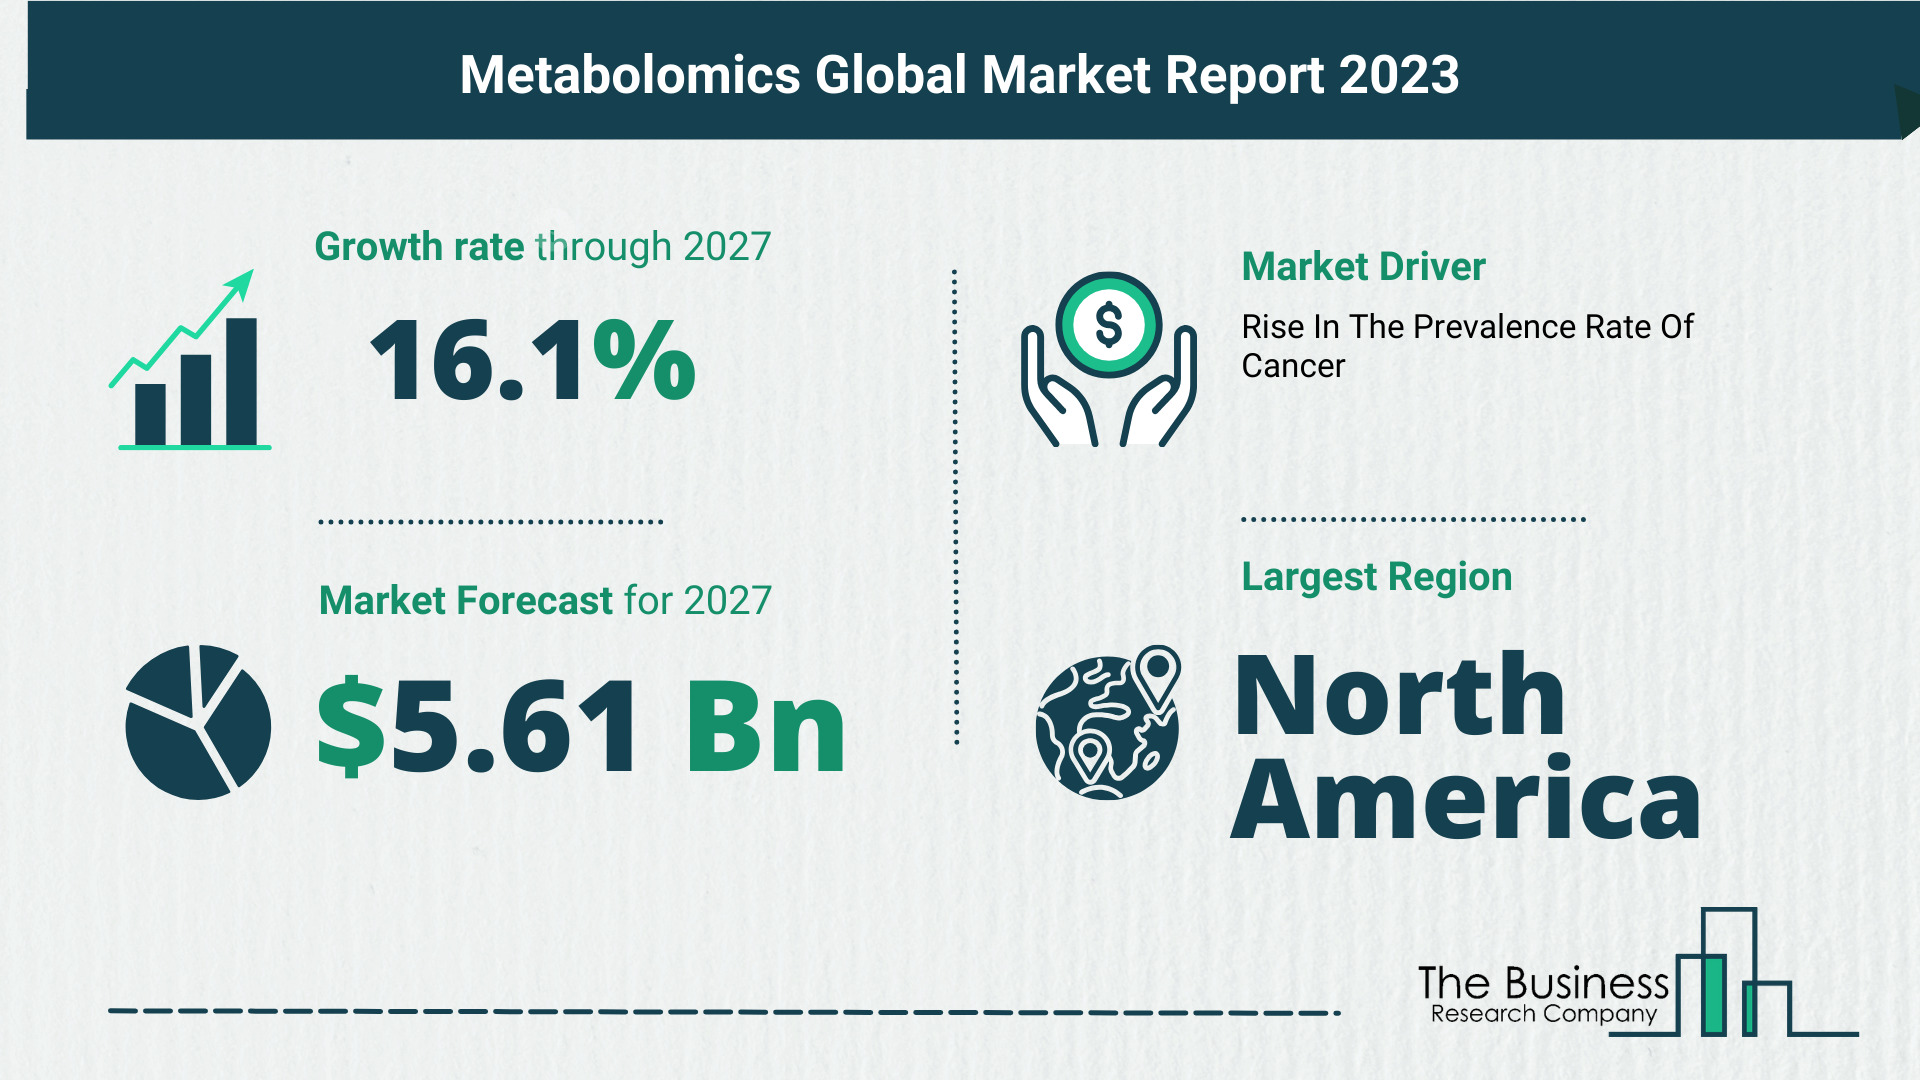 Top 5 Insights From The Metabolomics Market Report 2023